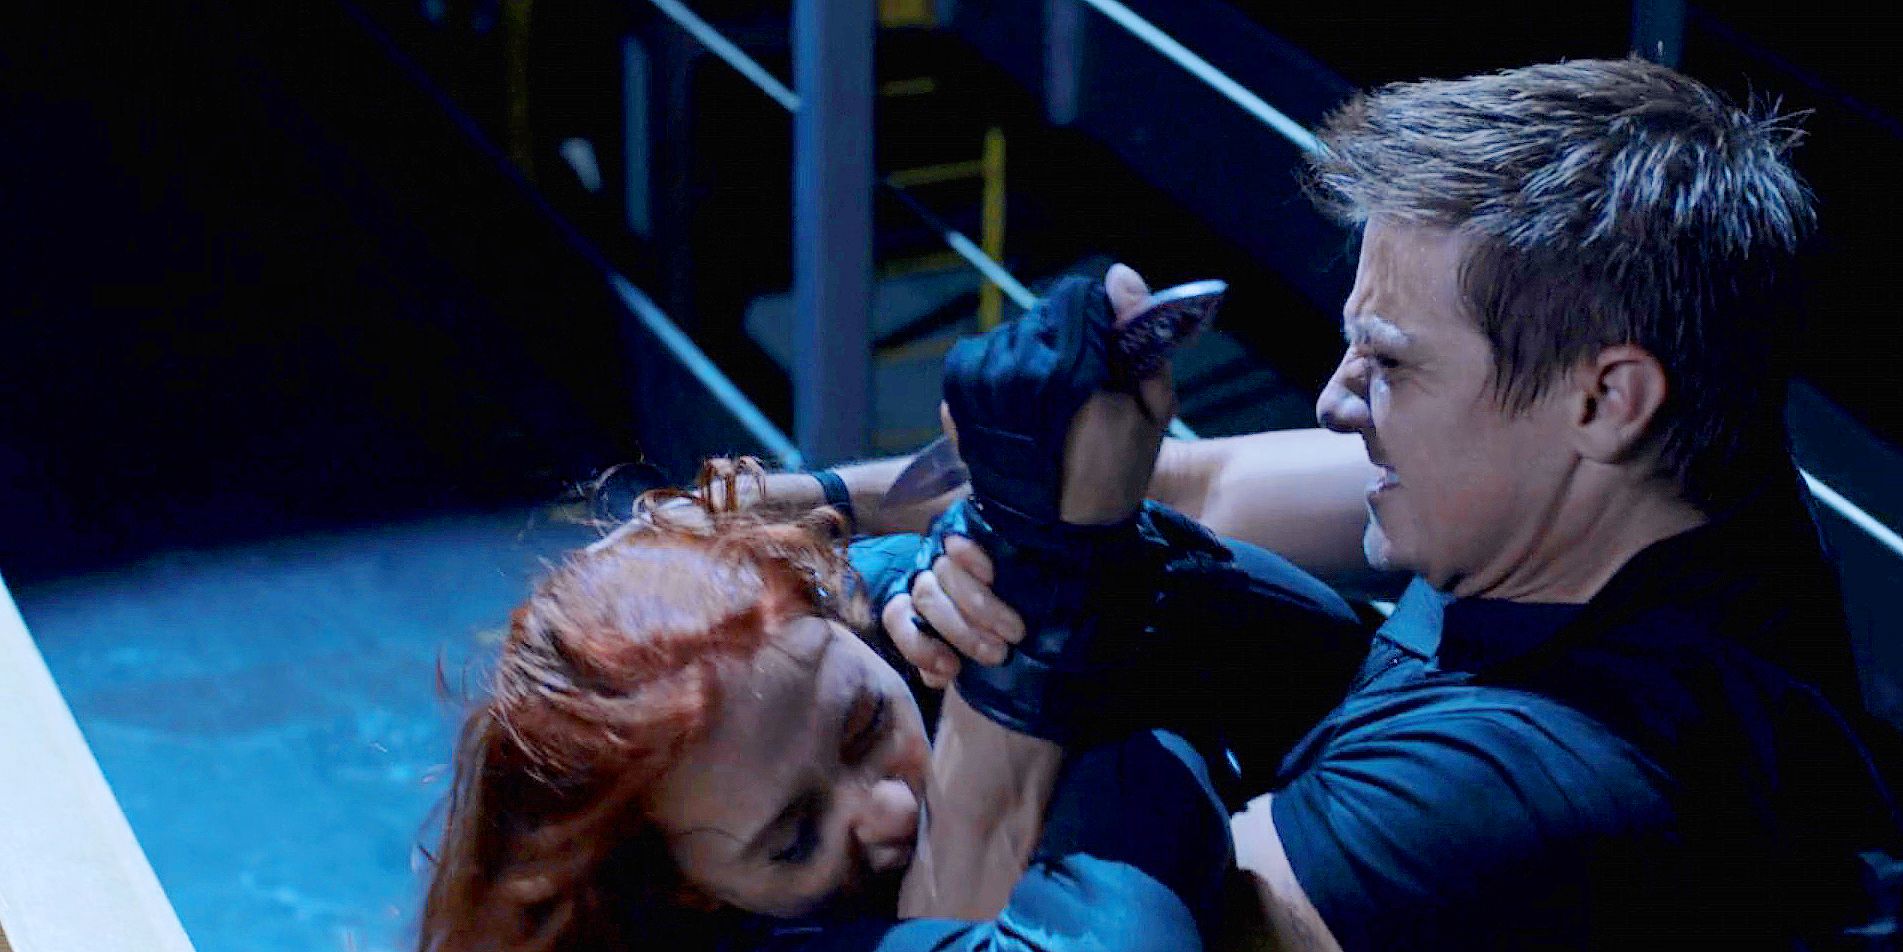 Black Widow and Hawkeye Fight in The Avengers